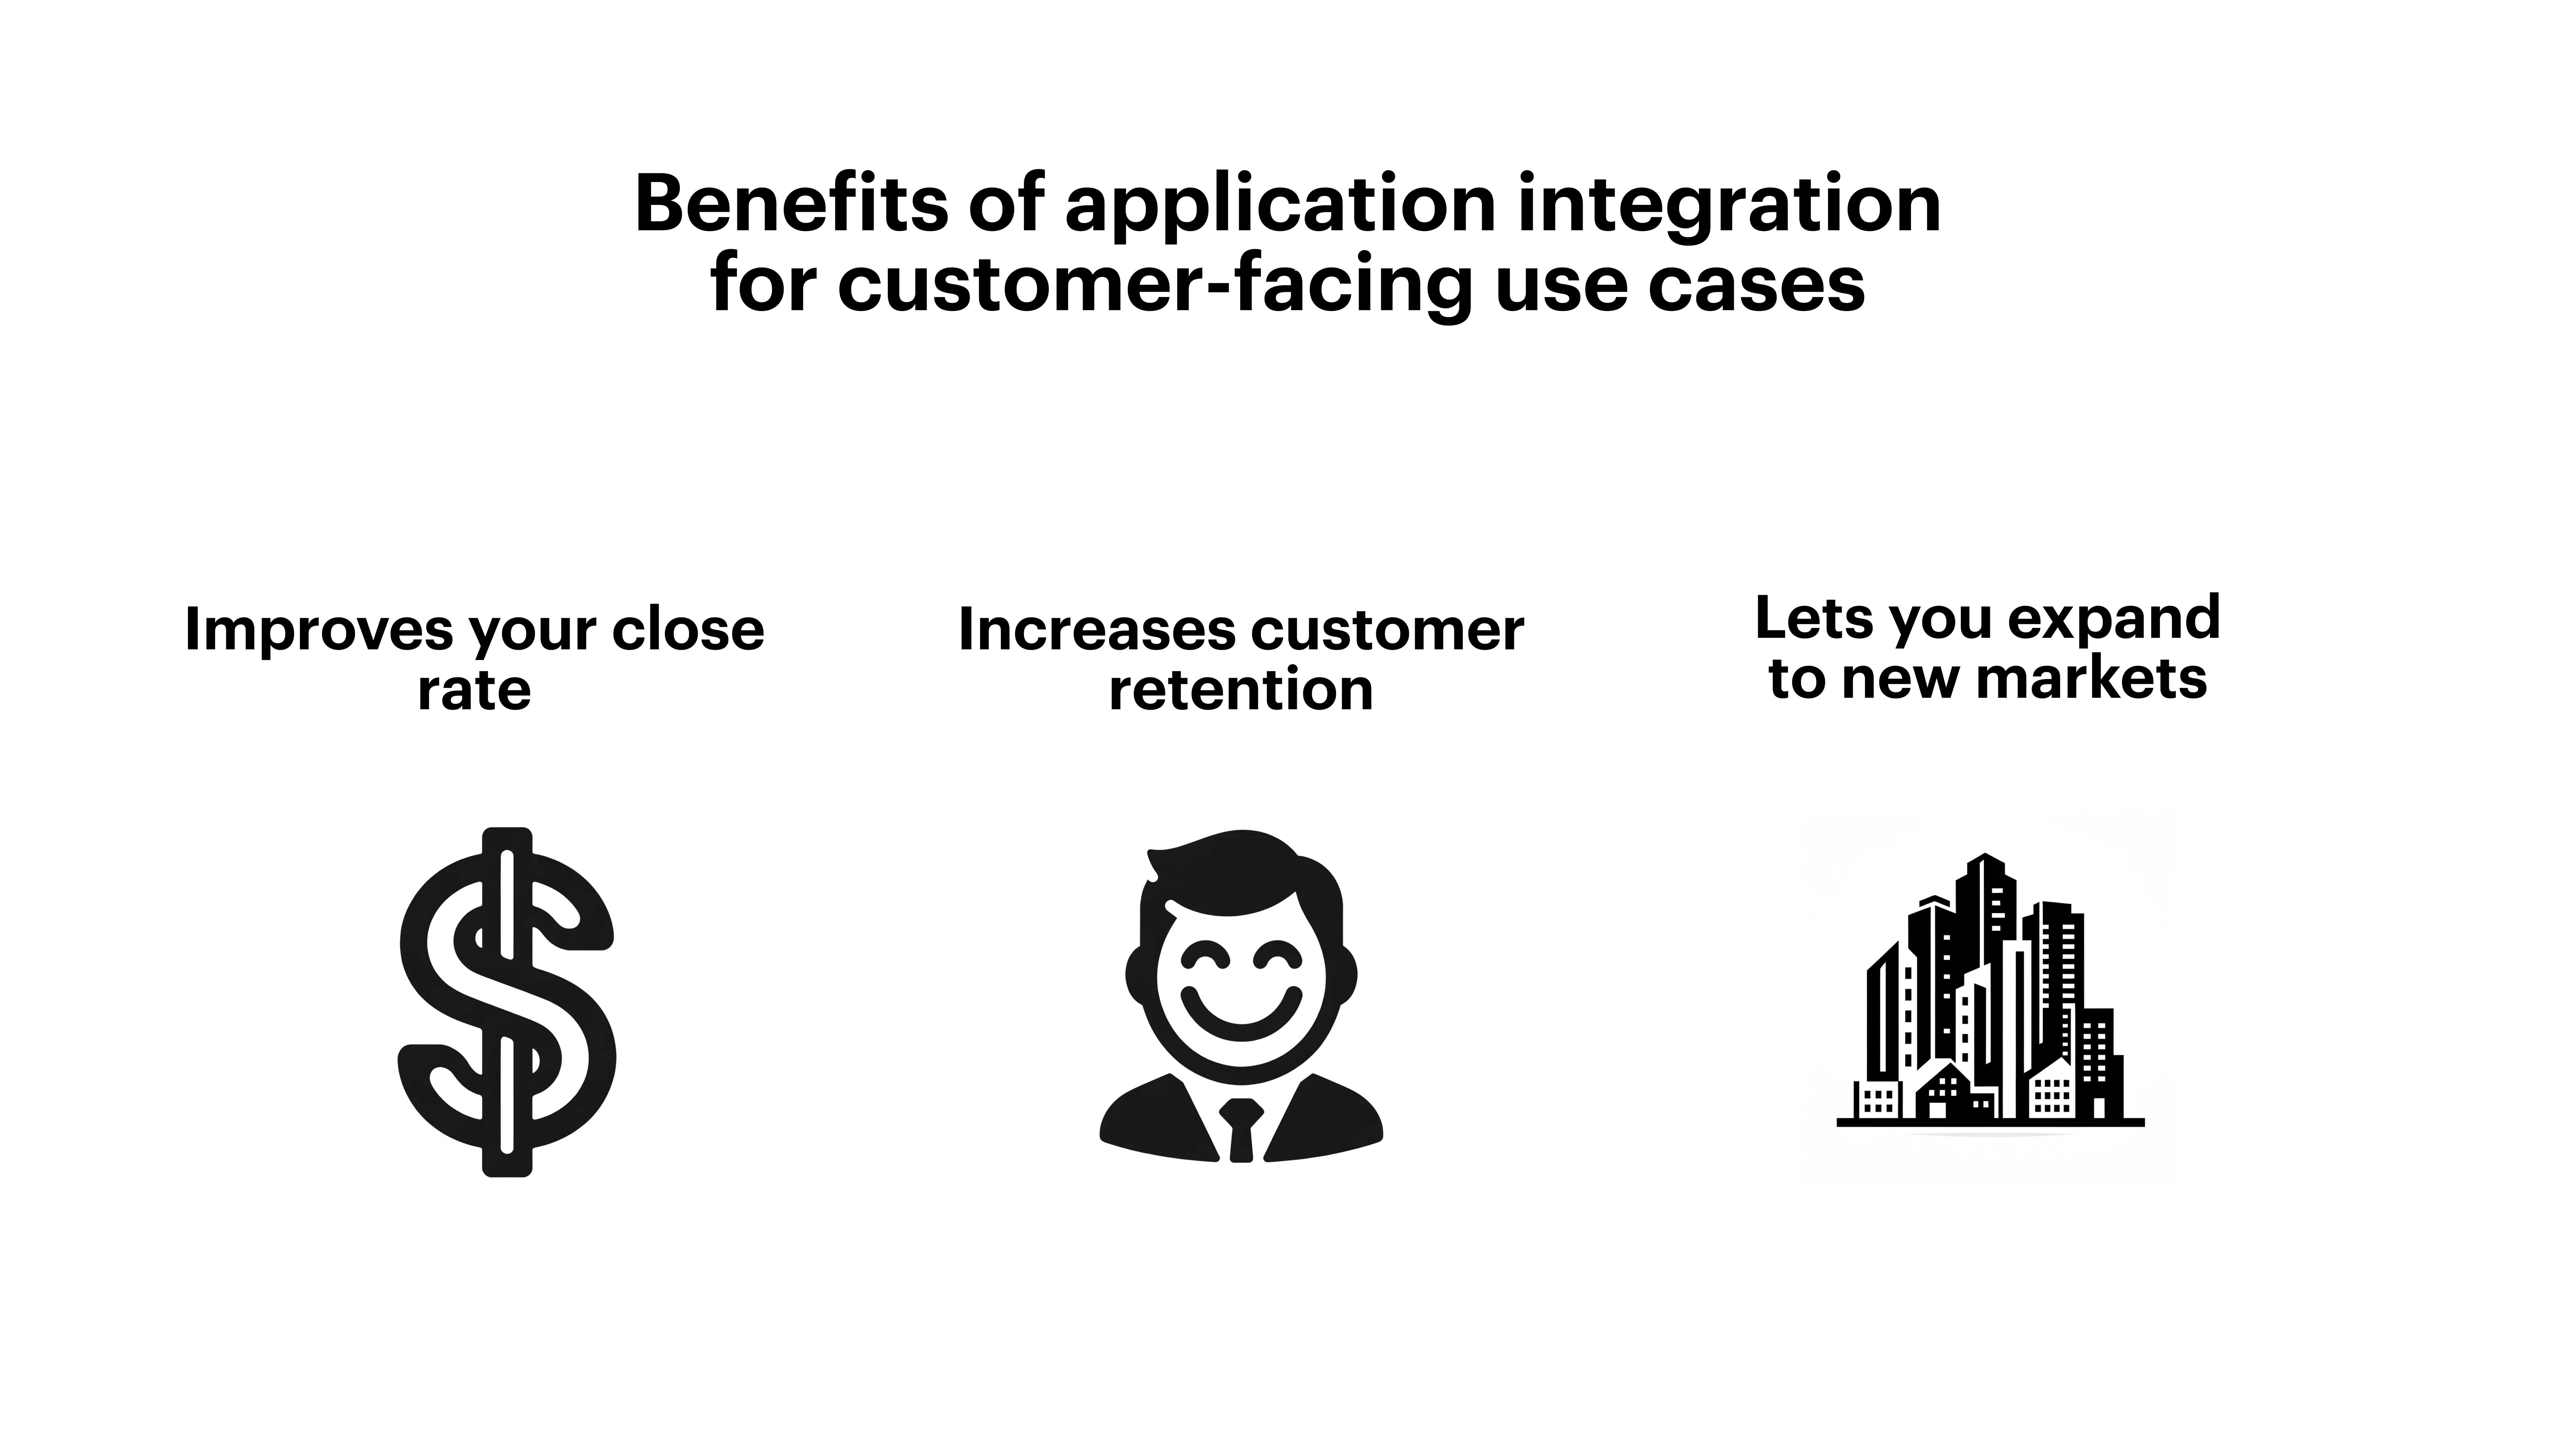 Benefits of application integration for customer-facing use cases